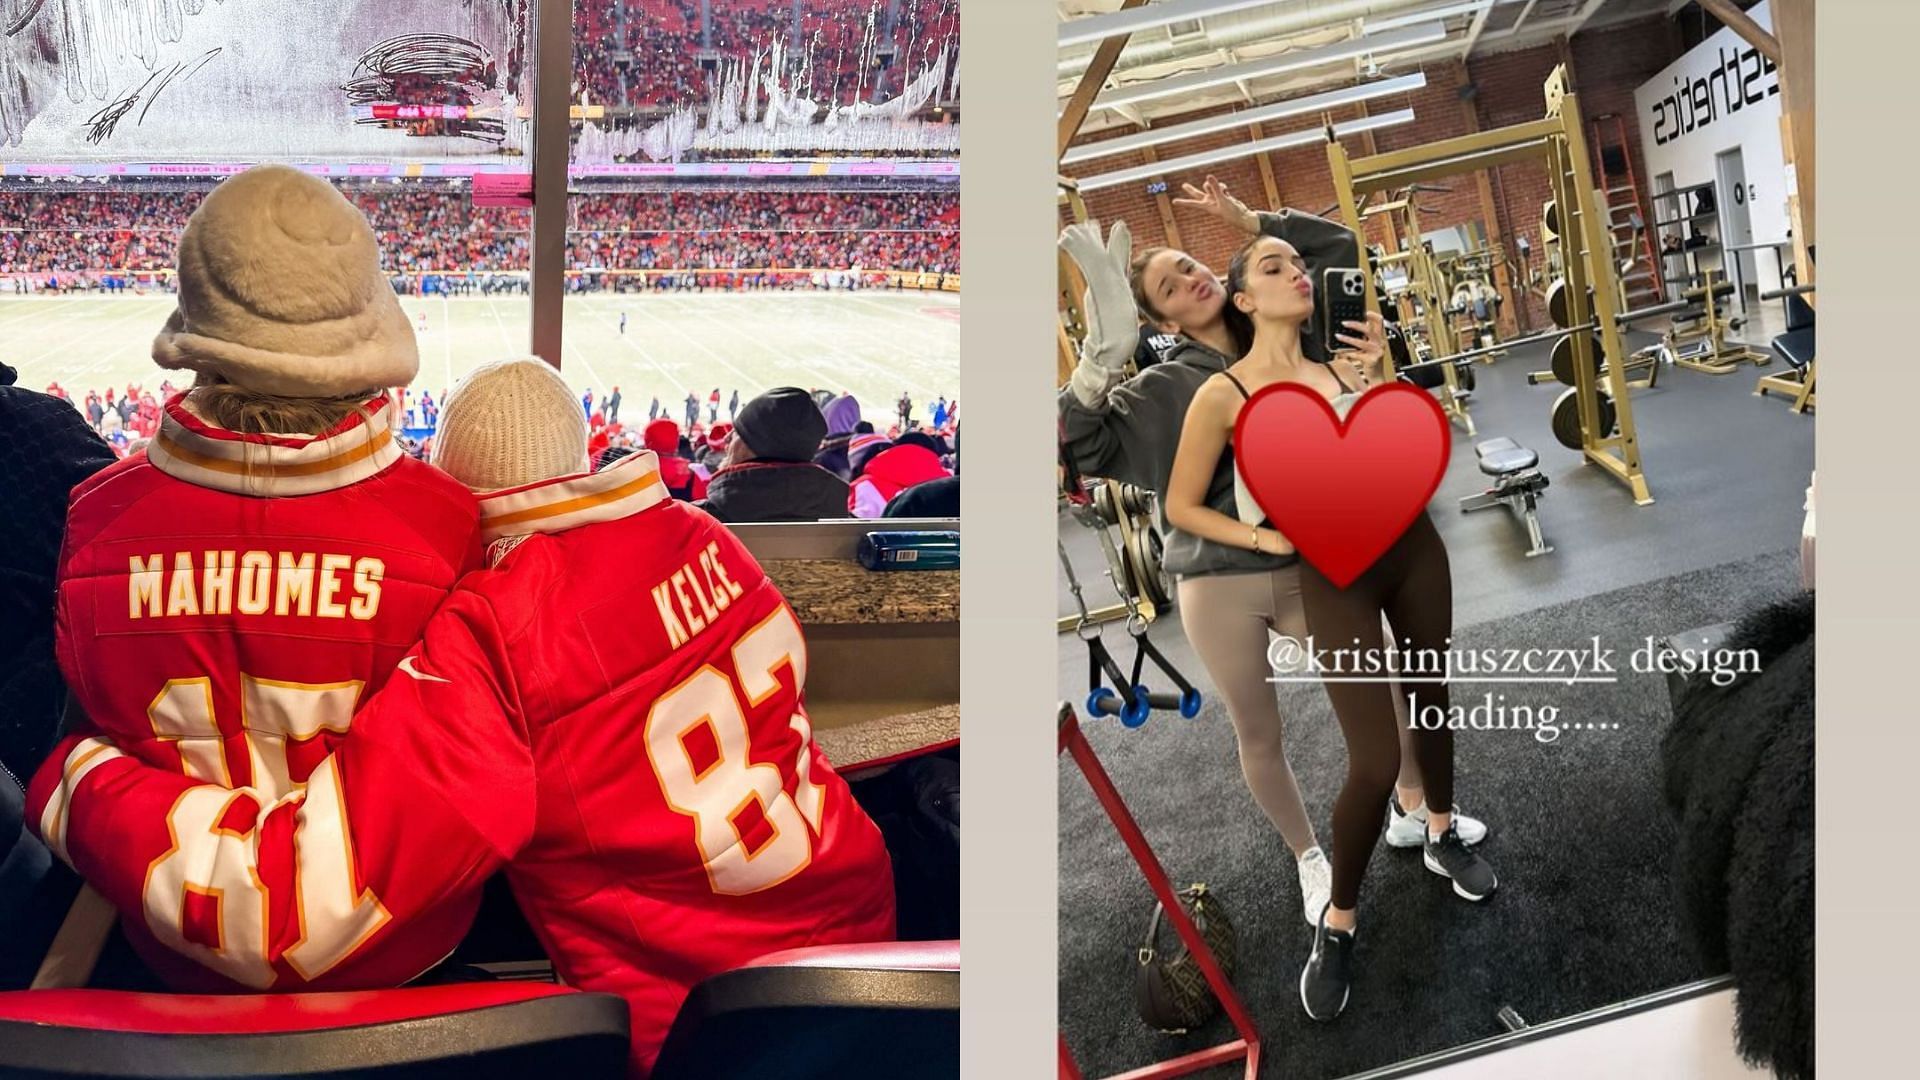 Olivia Culpo teases Taylor Swift-esque collab with Kristin Juszczyk ahead of Divisional Round vs Packers